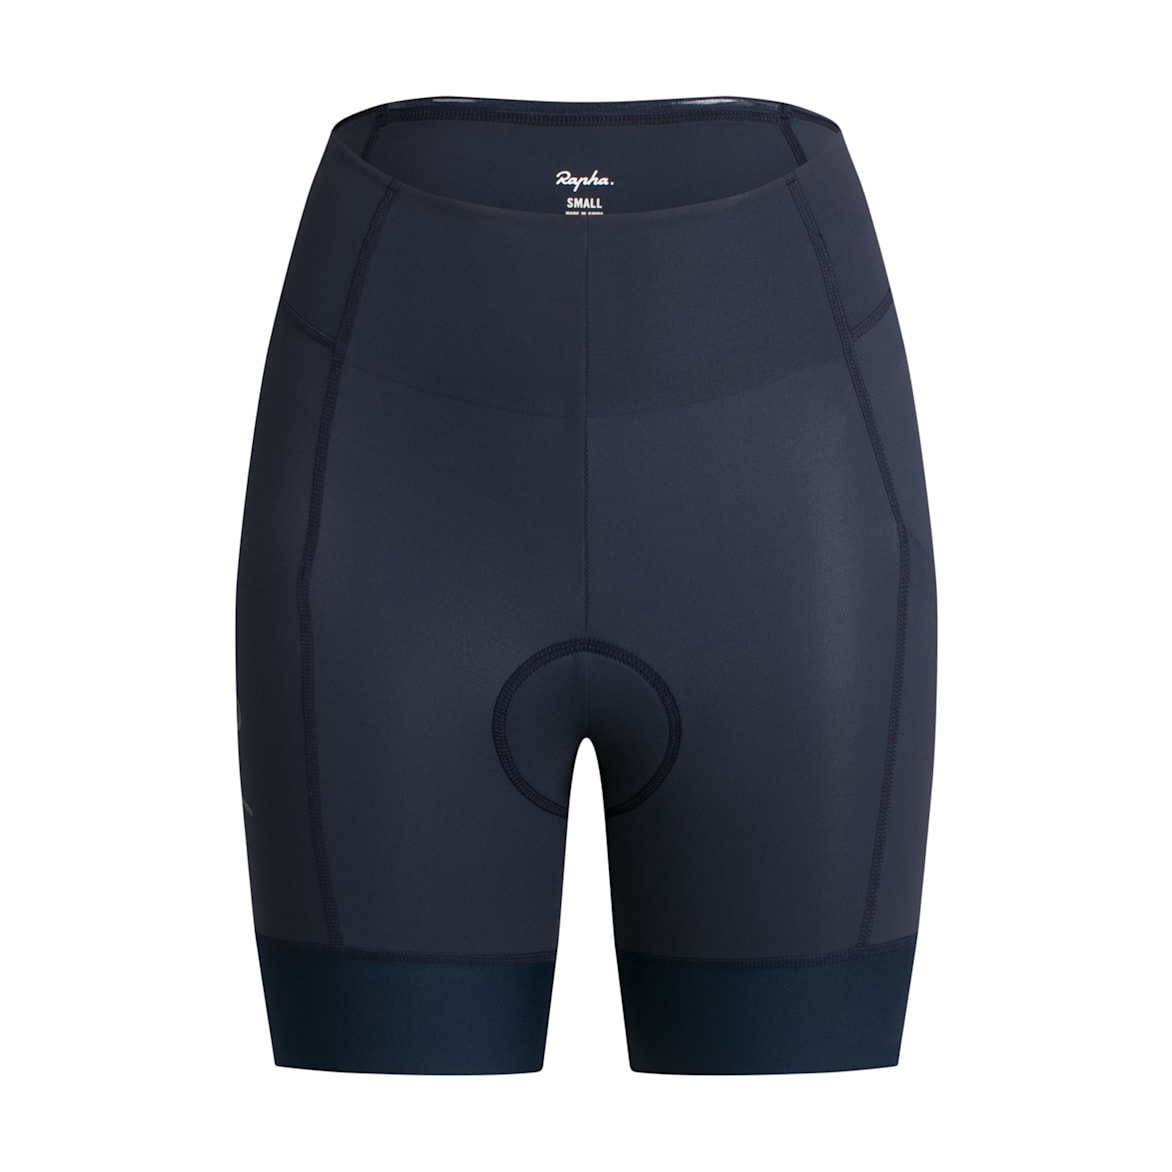 Rapha Women's Core Cargo Winter Tights with Pad